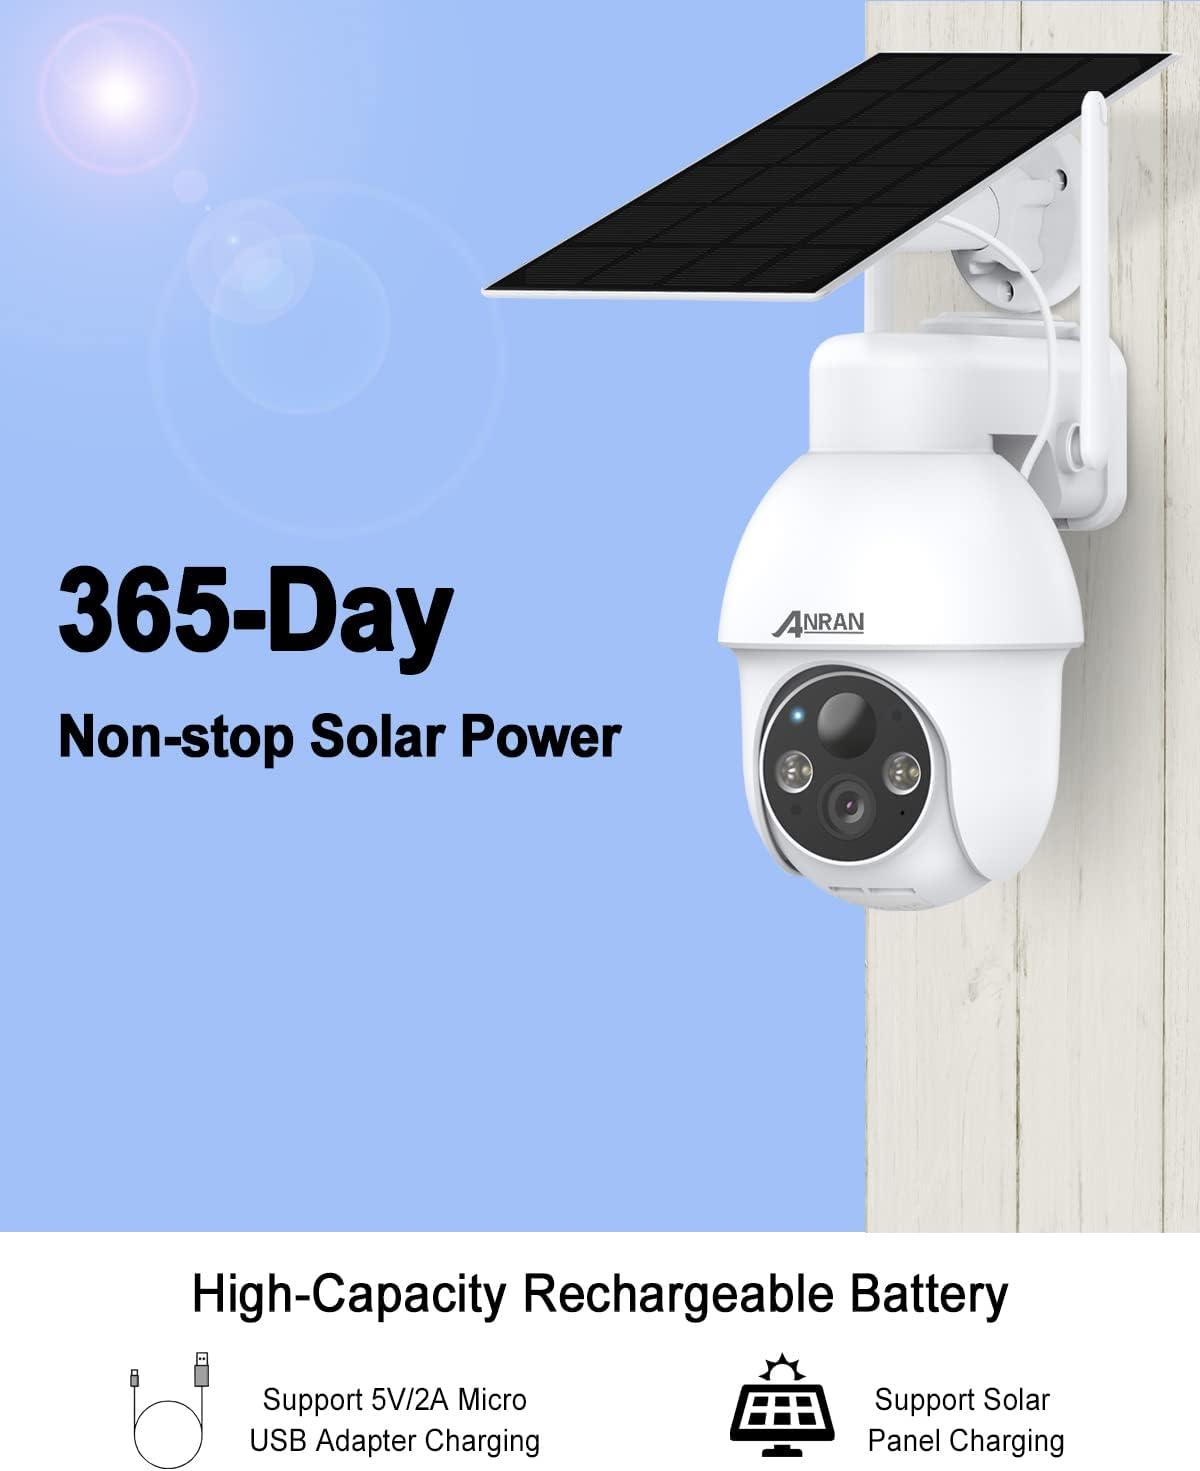 Security Cameras Wireless Outdoor-2K Cameras for Home Security Outside  Solar/Battery Powered 2.4G WiFi, 360° Color Night Vision, 2 Way Audio, PIR